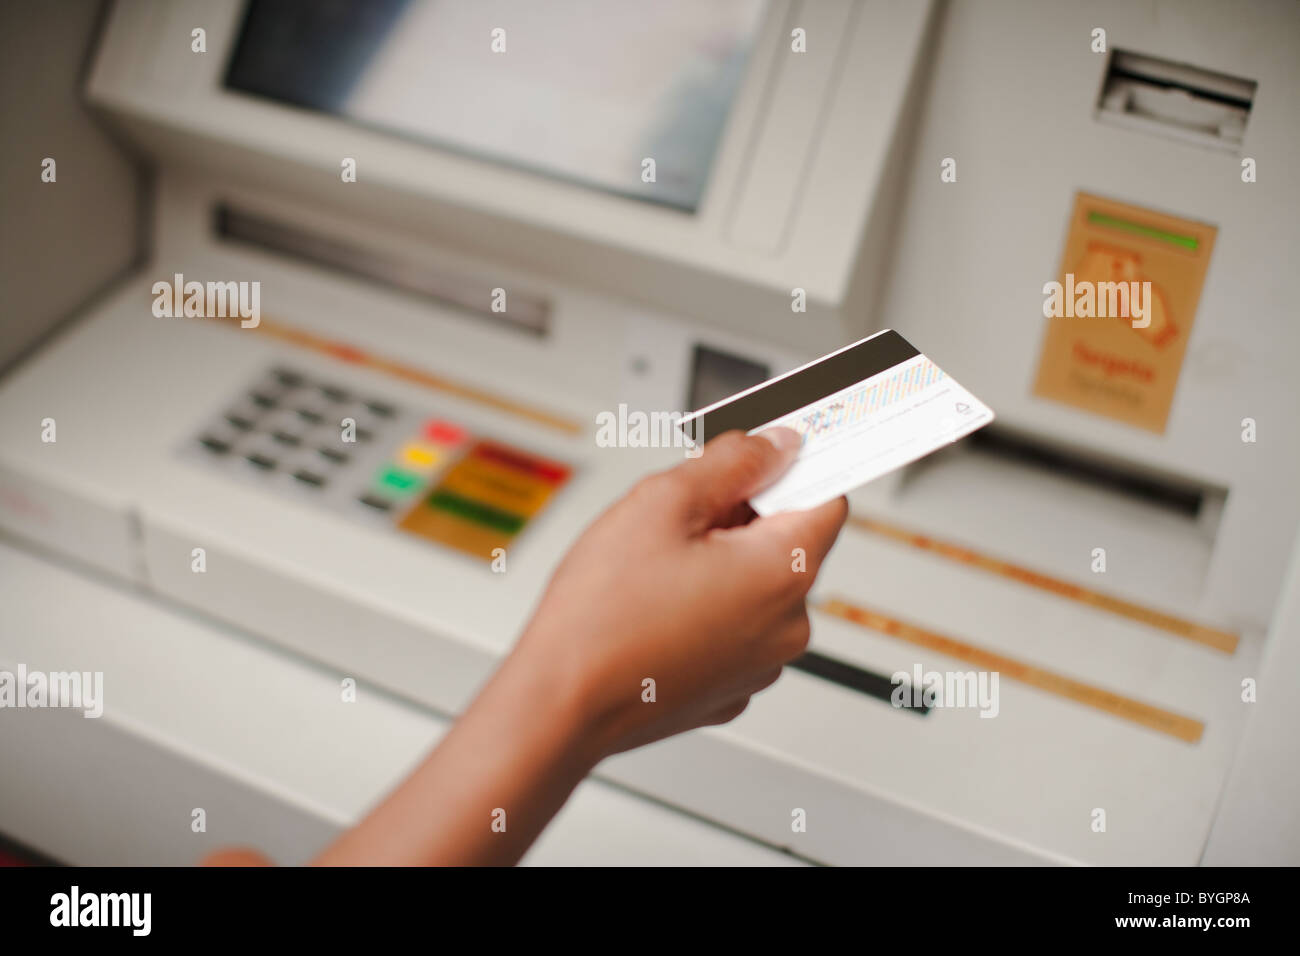 Human hand holding credit card, cash machine in the background Stock Photo